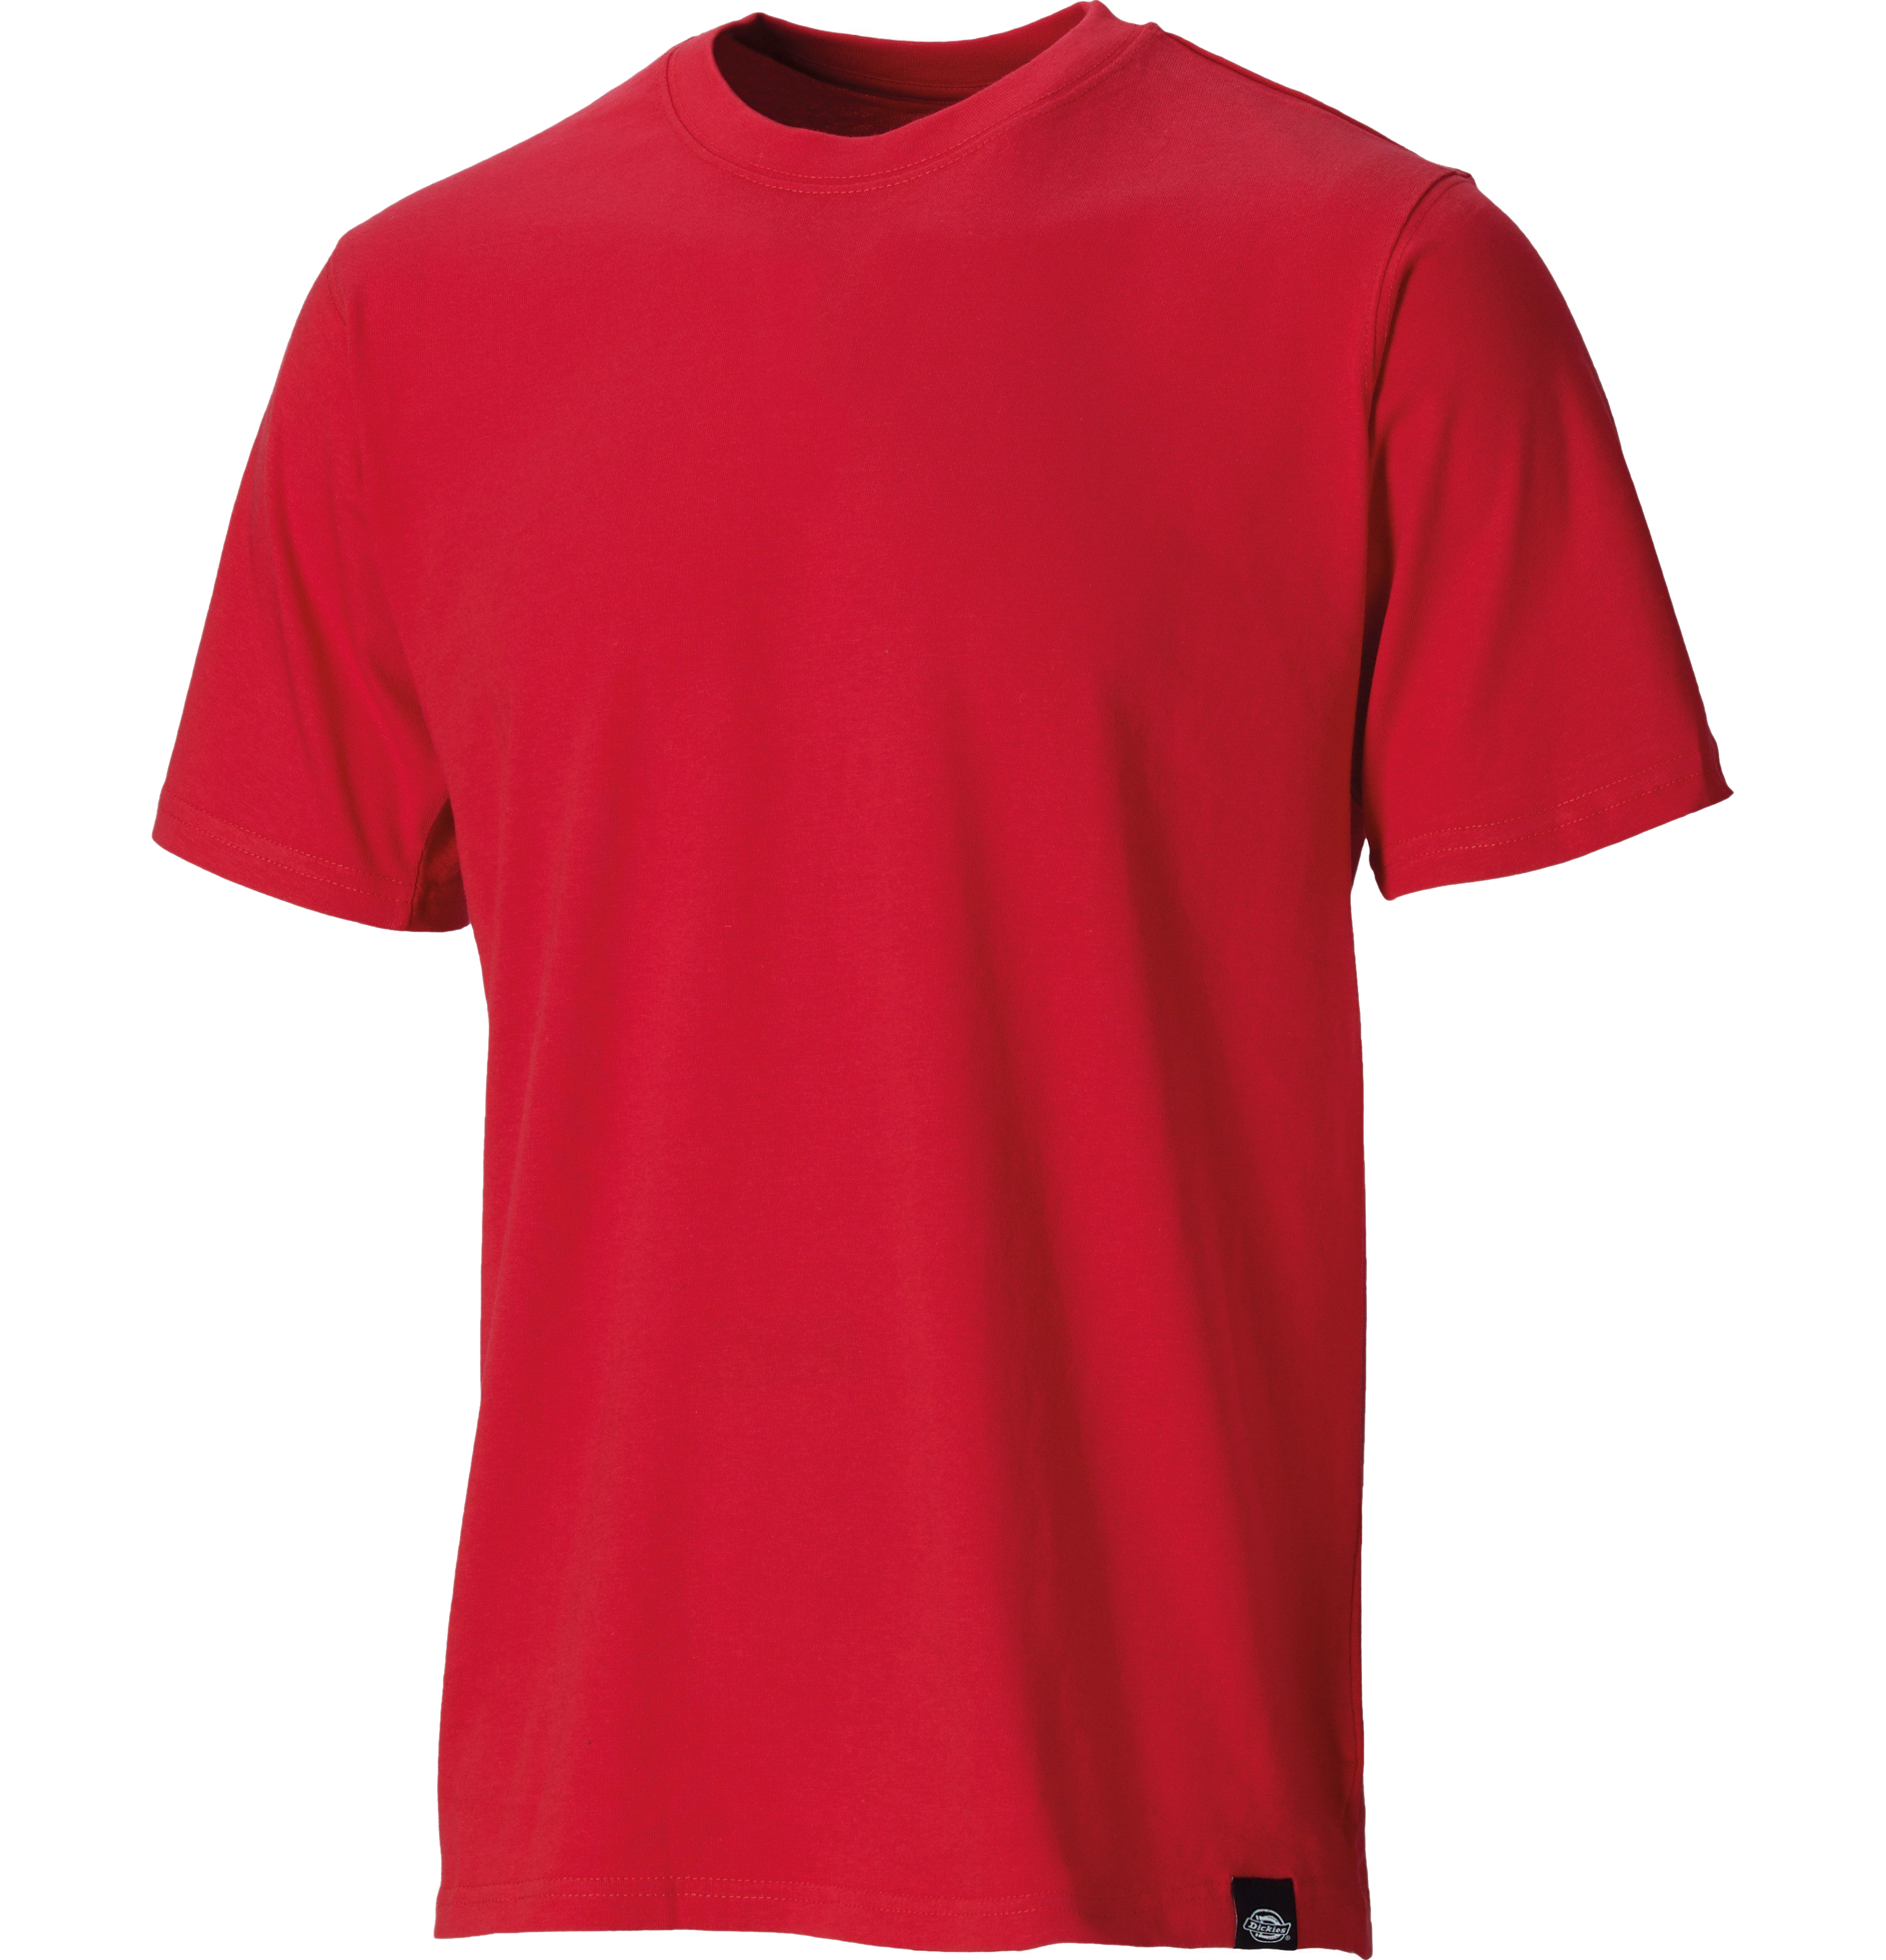 Plain Red T-Shirt PNG Background Image